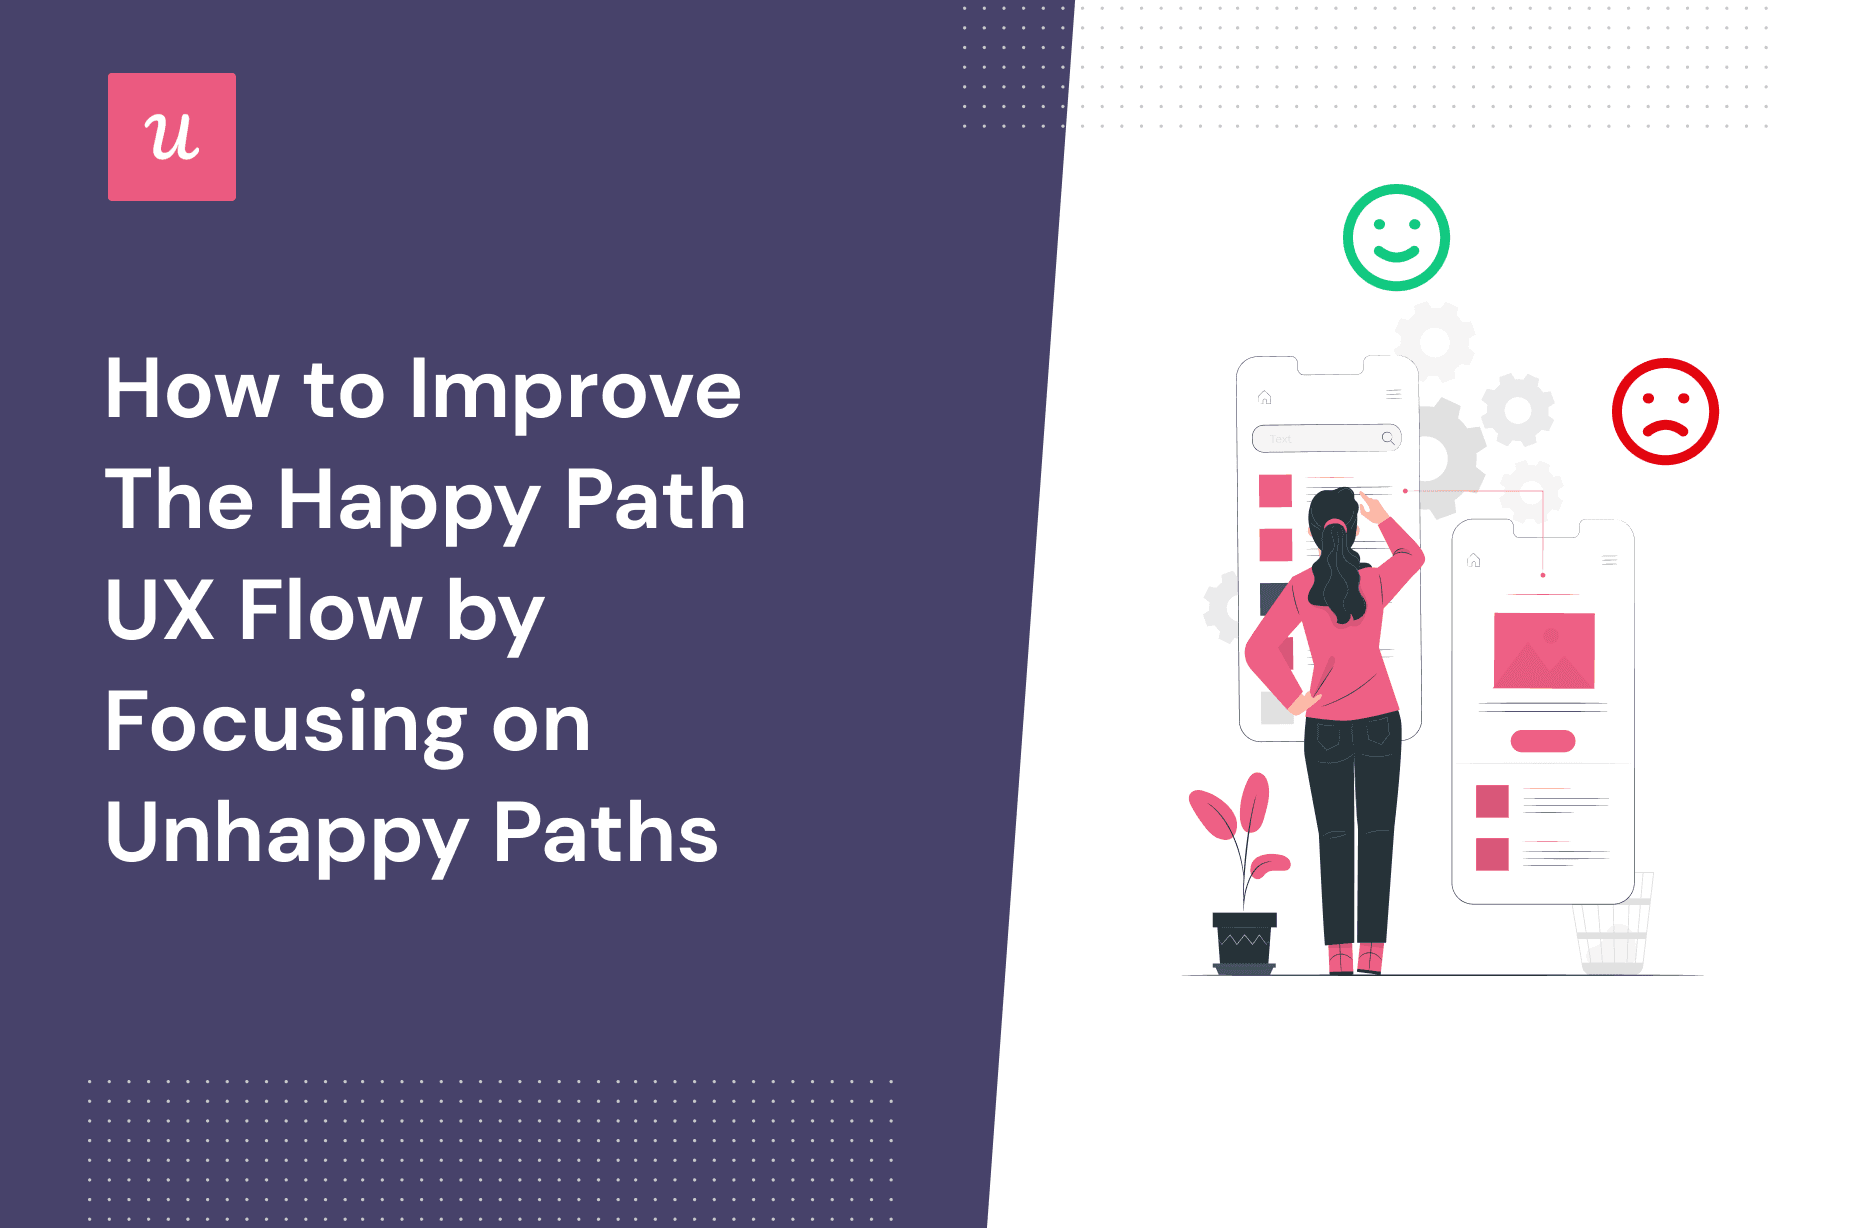 How to Improve The Happy Path UX Flow by Focusing on Unhappy Paths